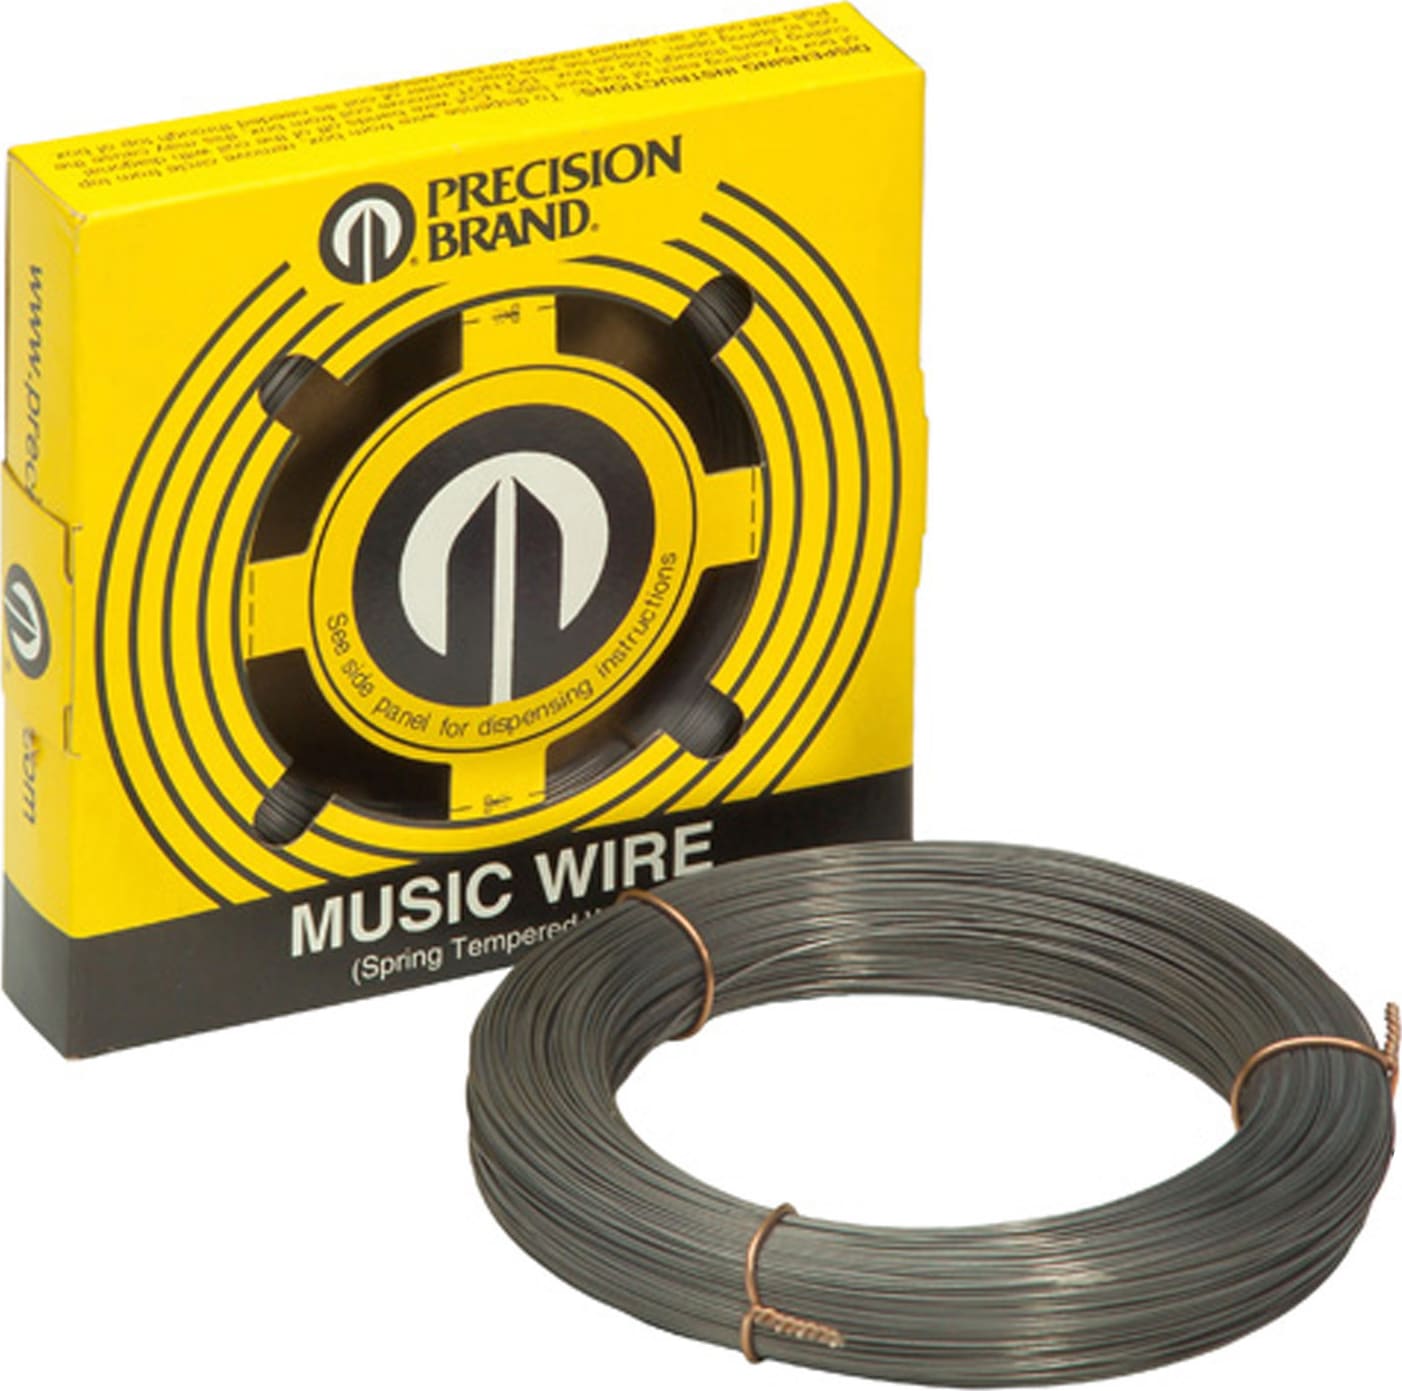 Wrapping Wire and Fine Wire for Music String…